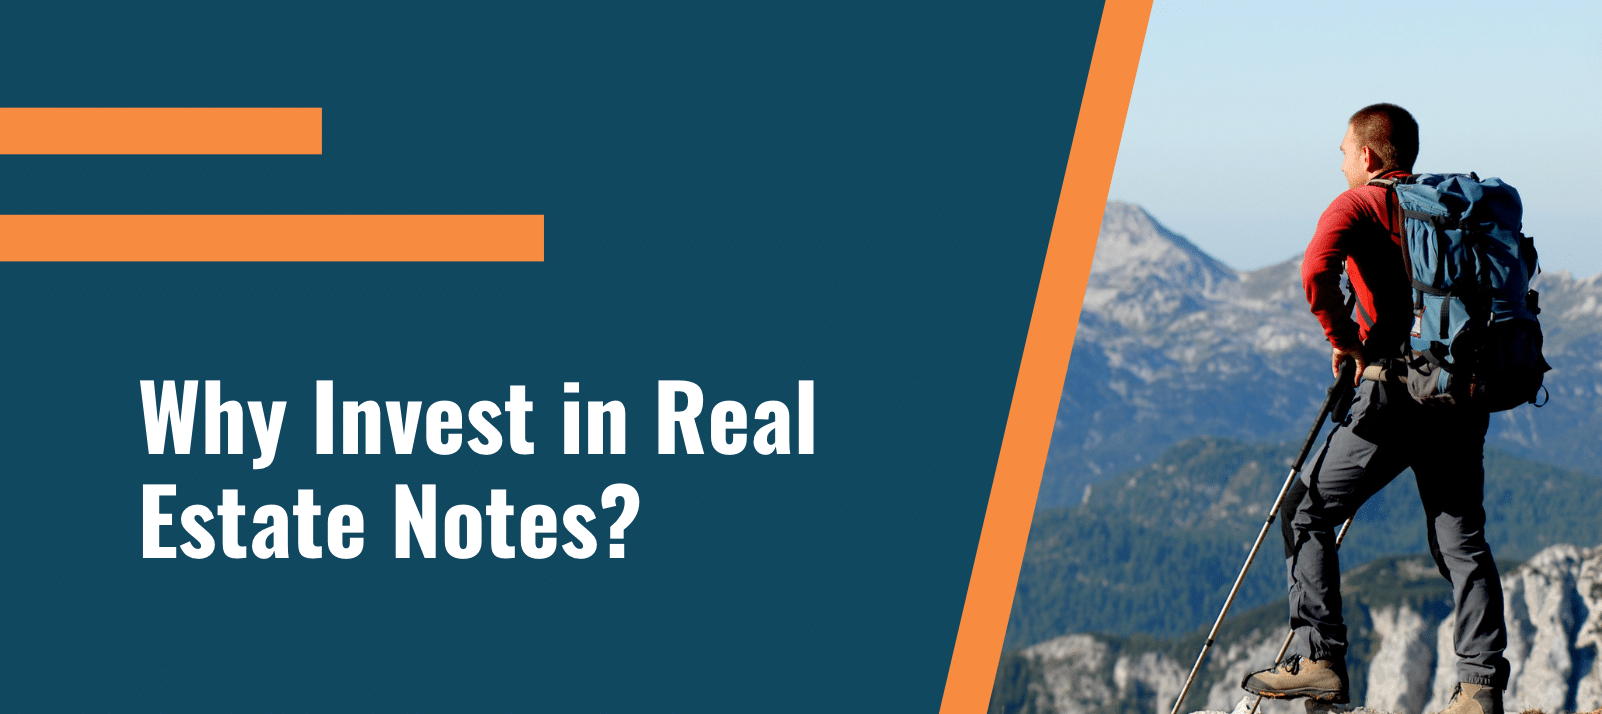 Why invest in real estate notes